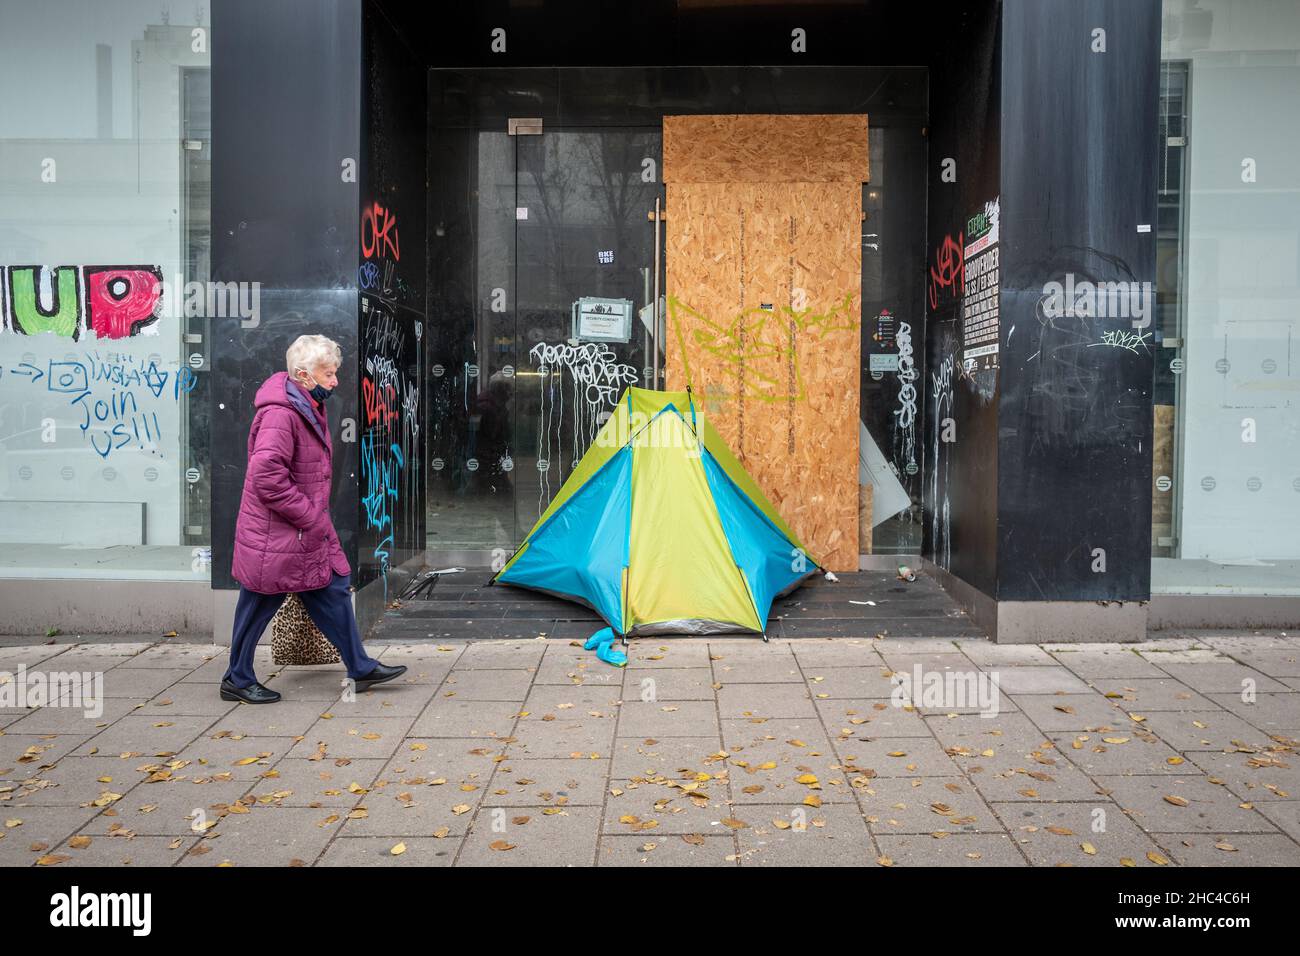 Brighton, December 17th 2021: Homeless person's tent in a shop doorway in Brighton city centre Stock Photo